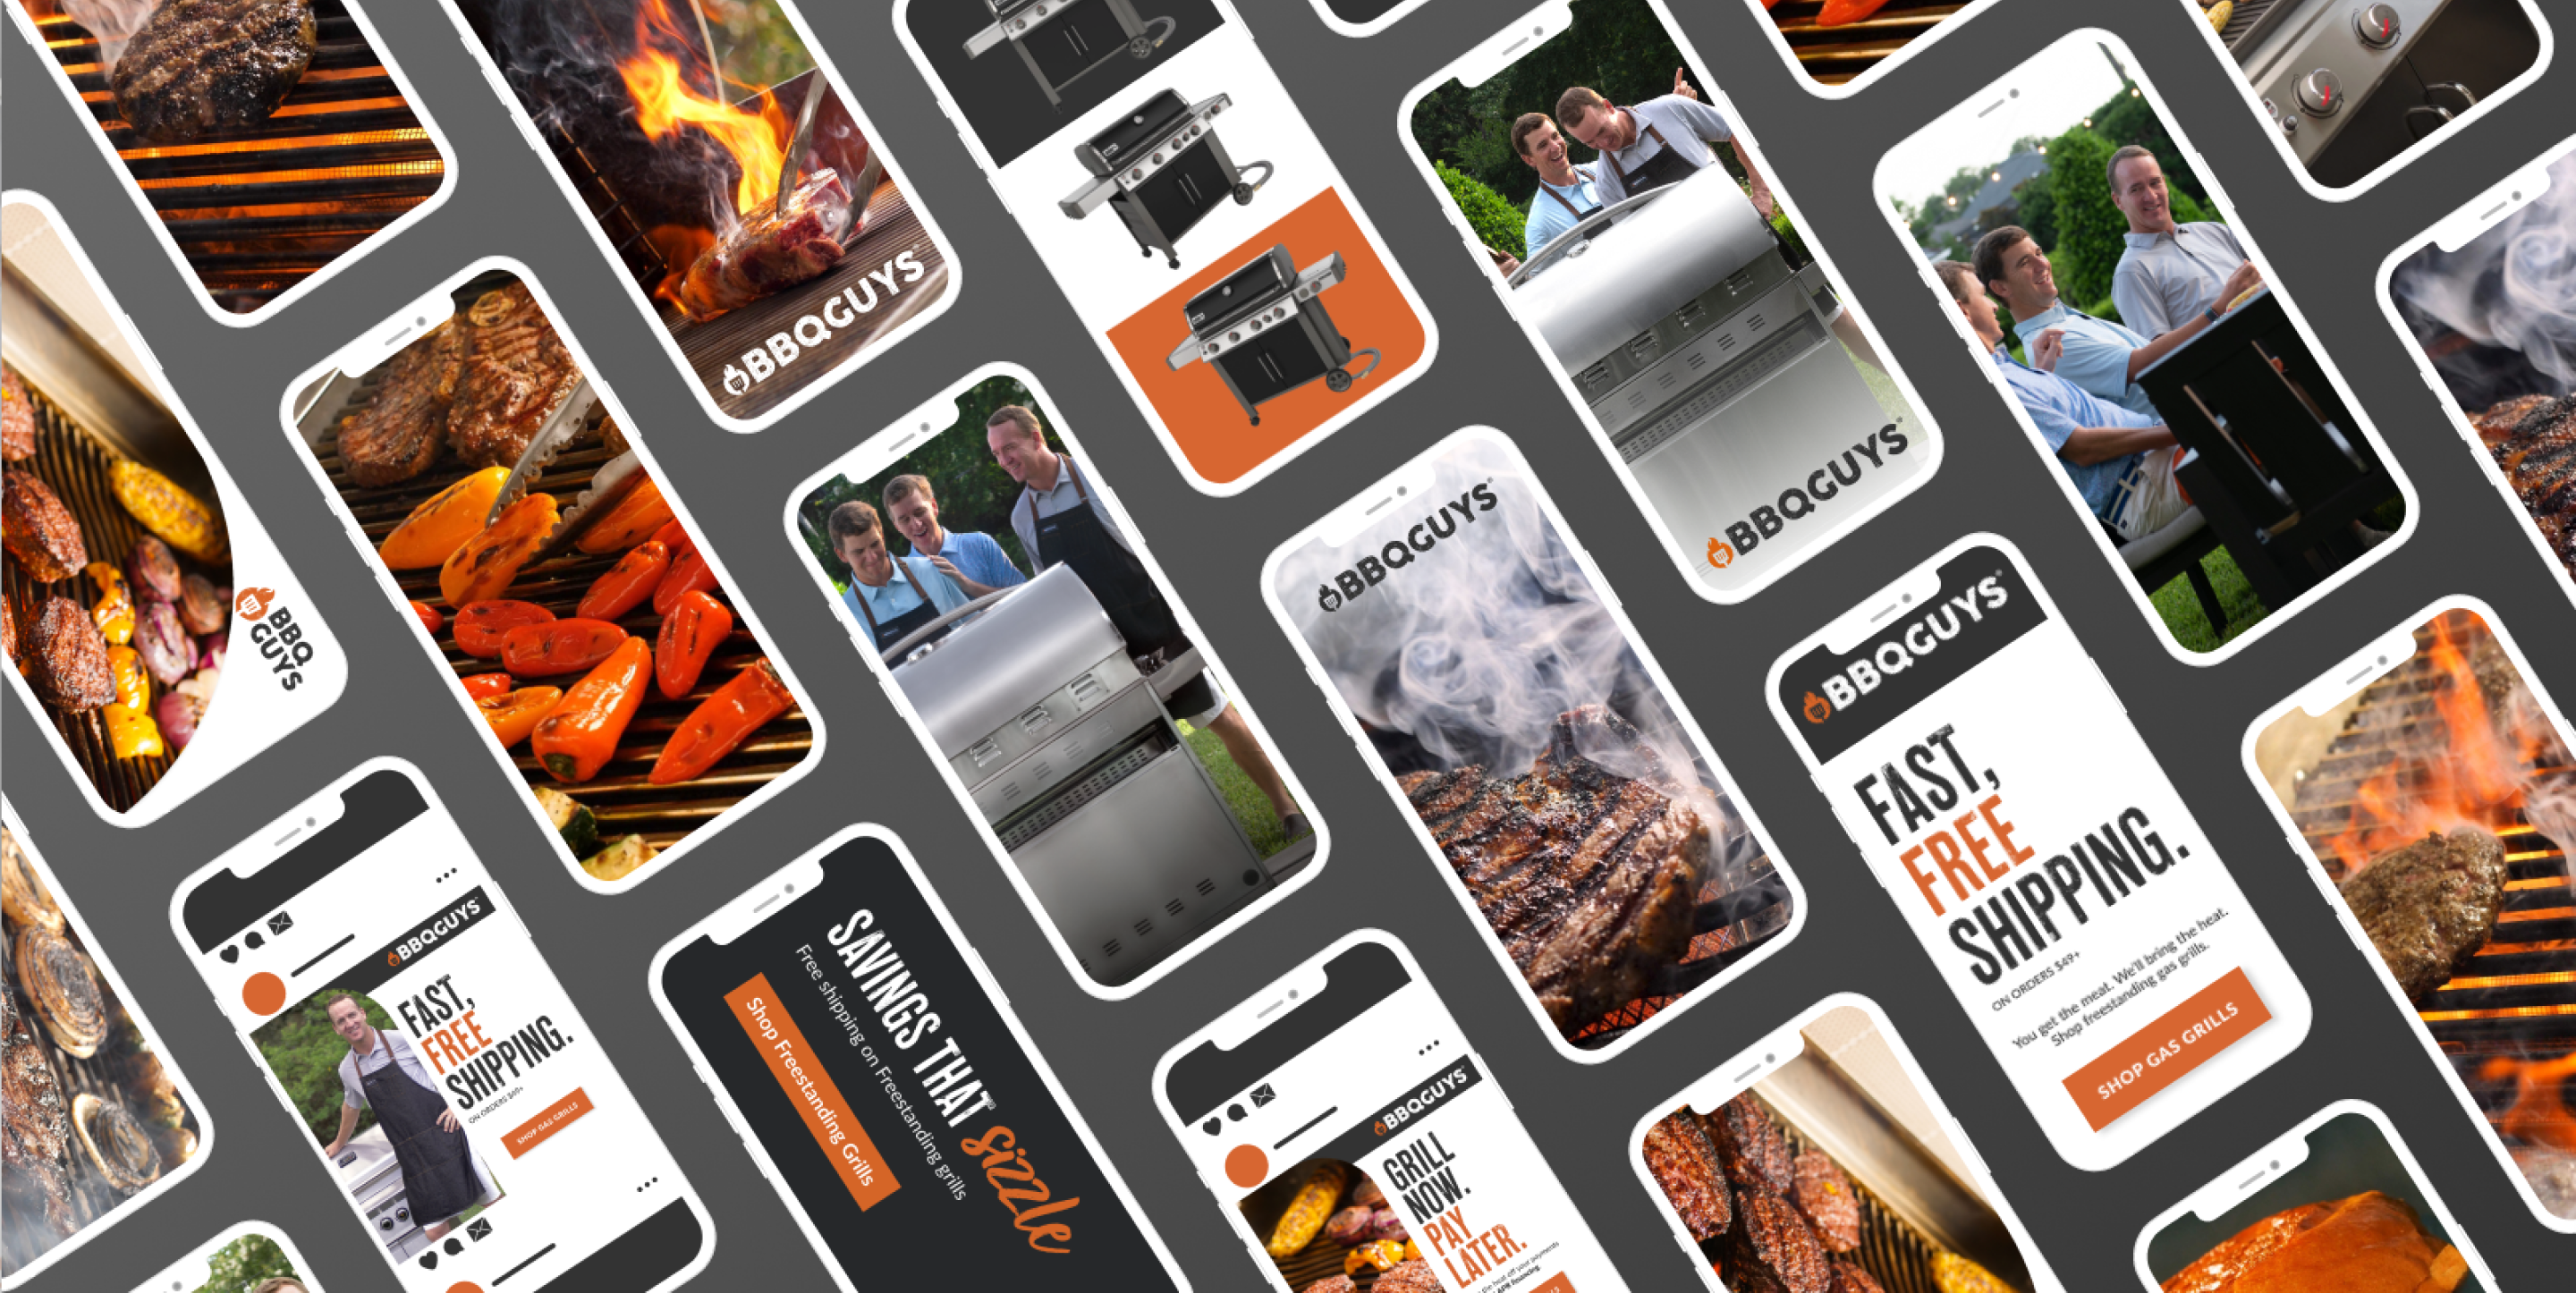 Various BBQGuys ads and images arranged on mobile devices.